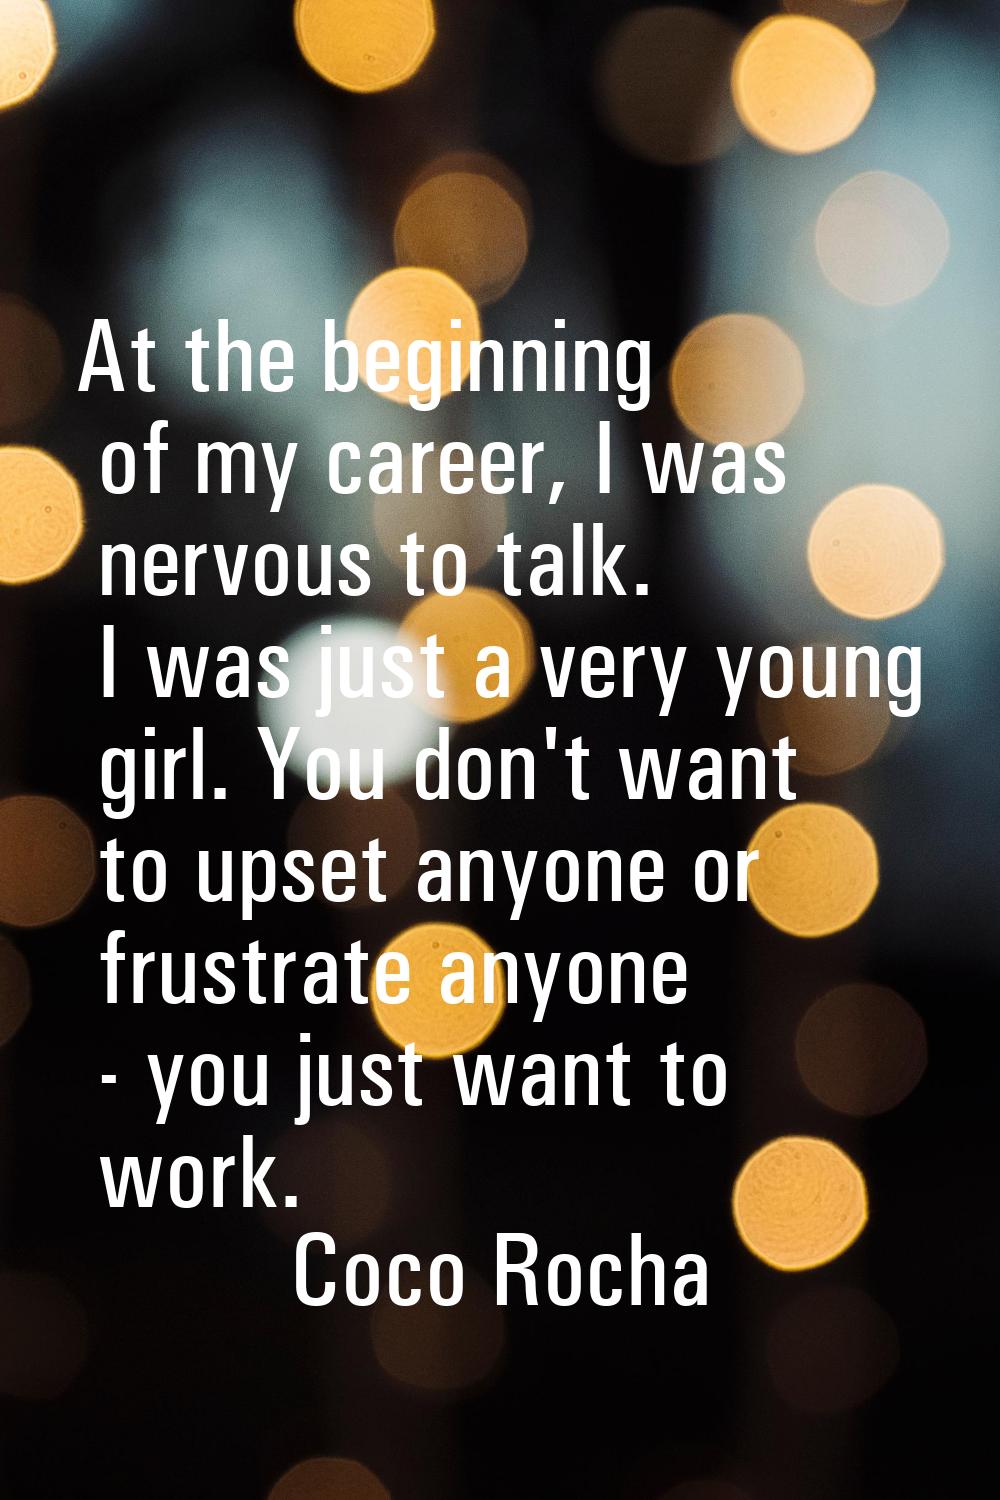 At the beginning of my career, I was nervous to talk. I was just a very young girl. You don't want 